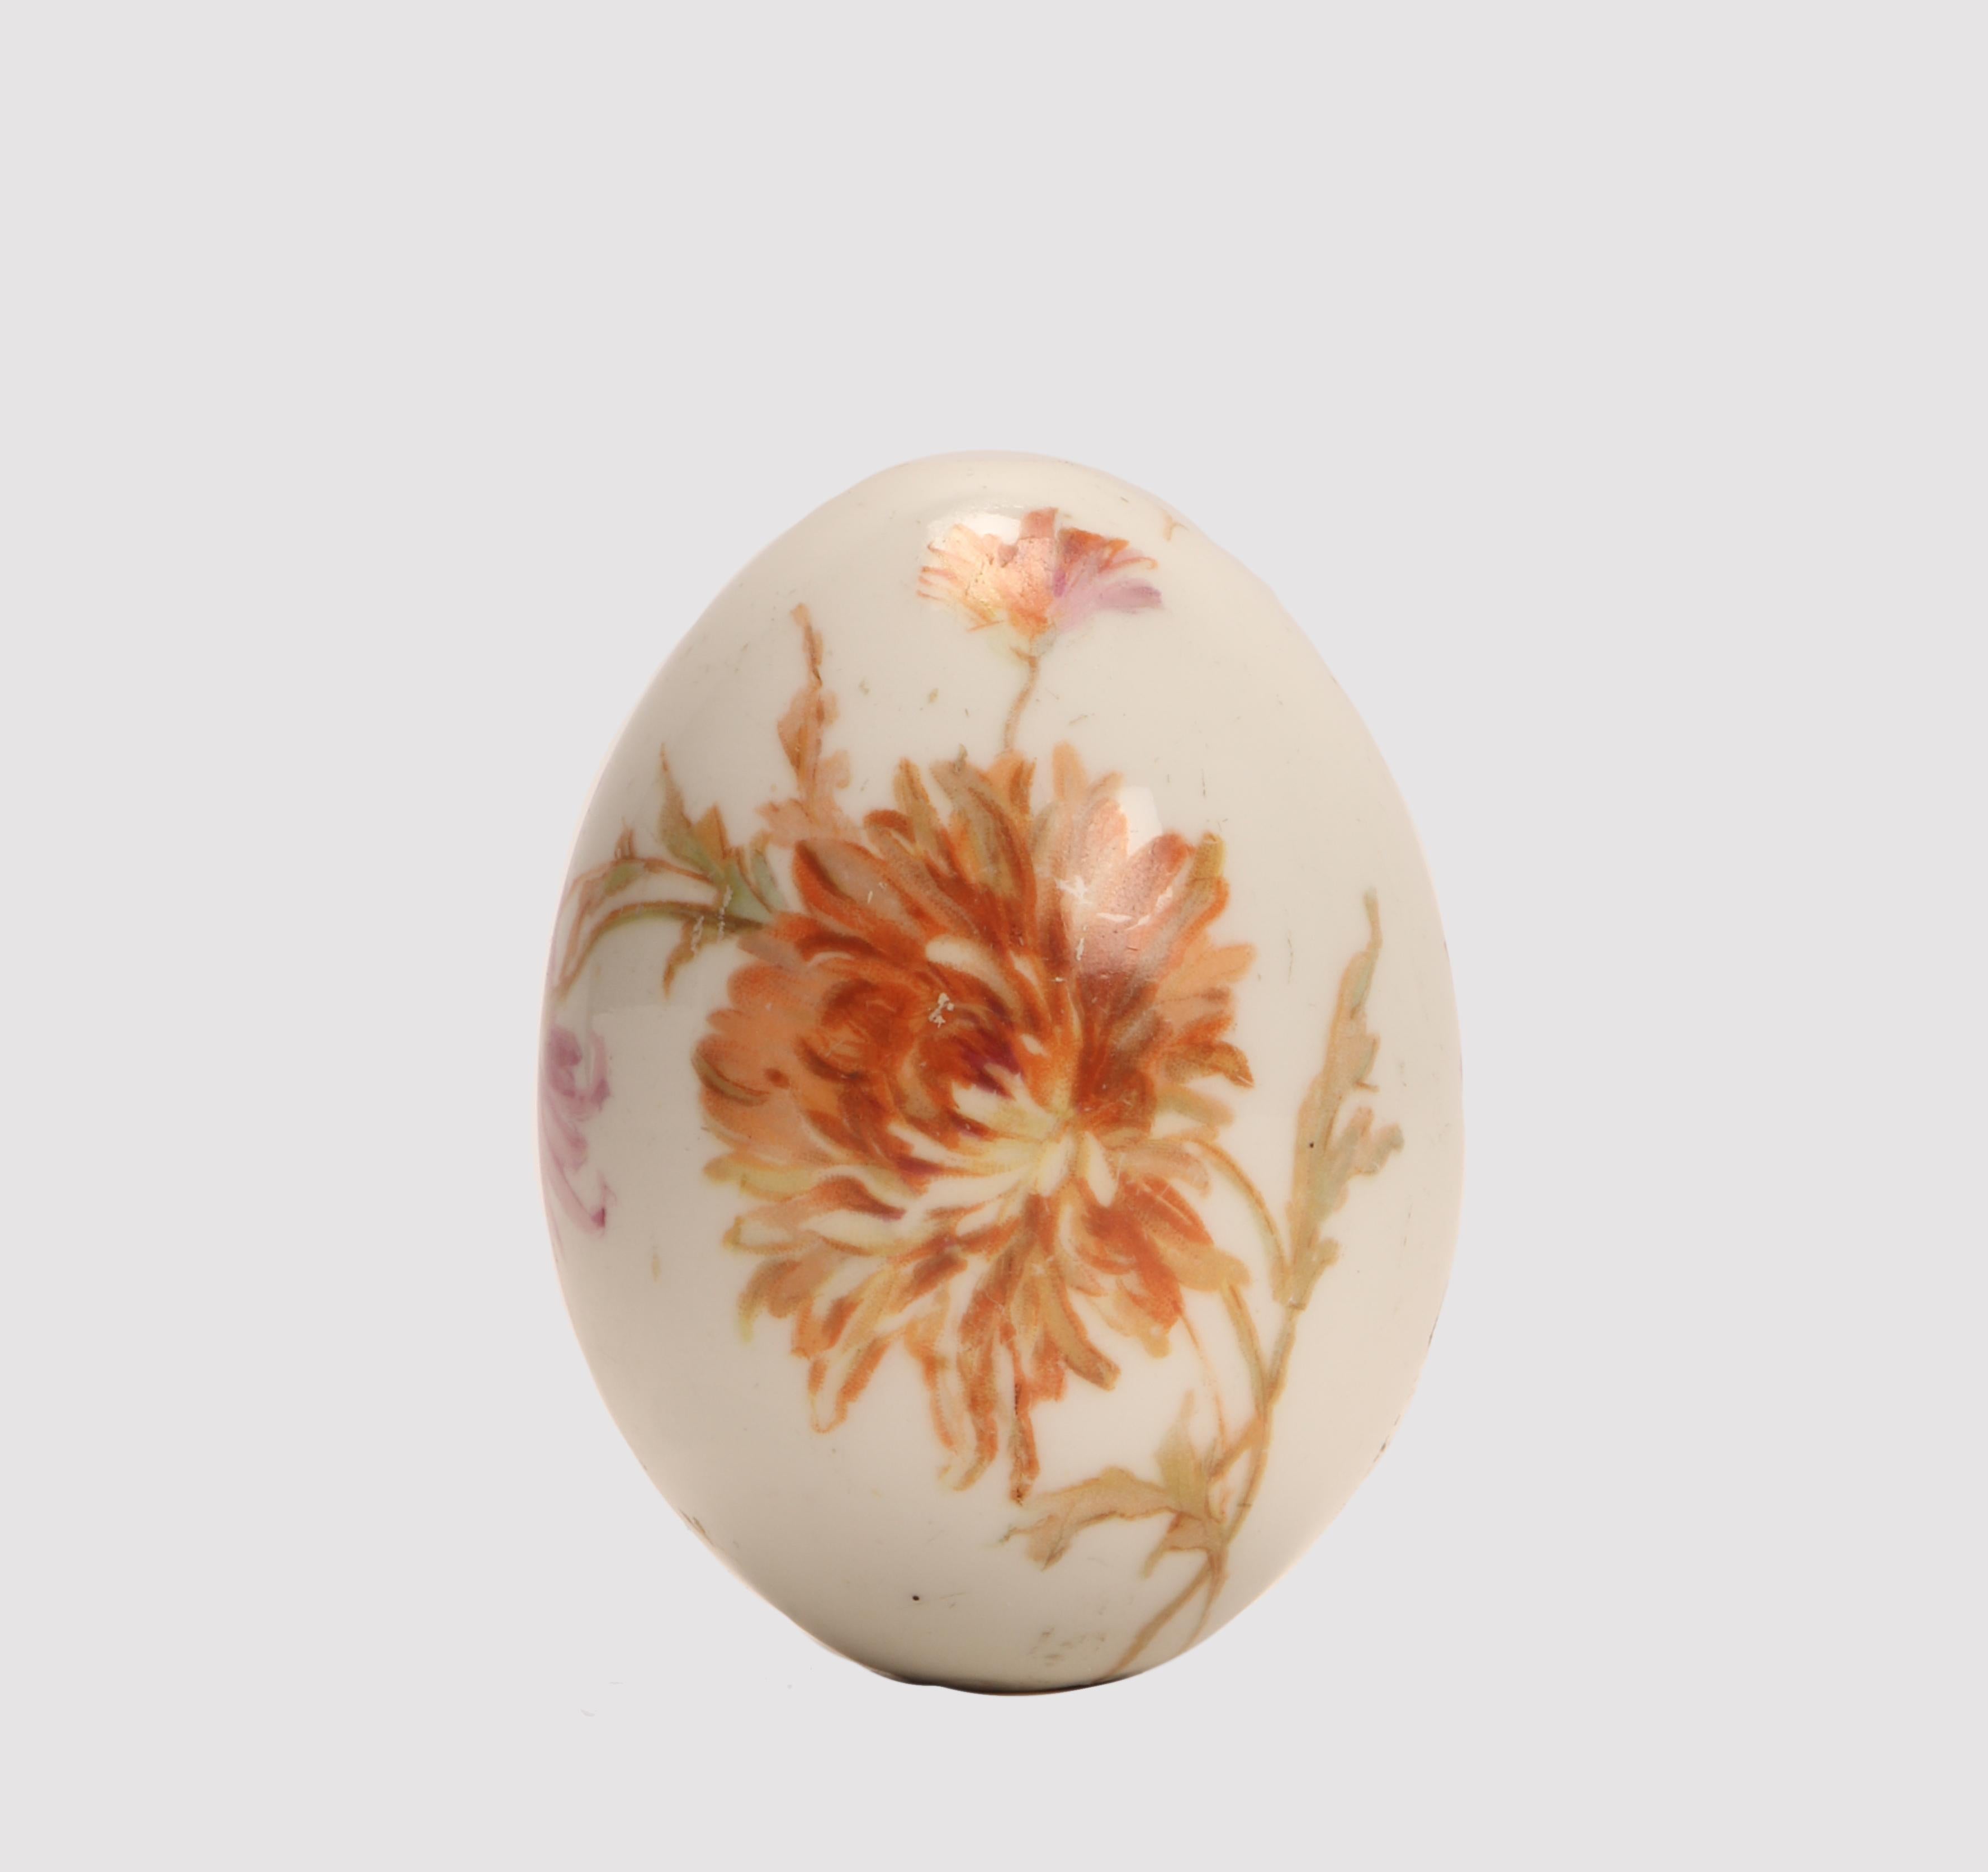 A painted porcelain Easter egg, depicting dahlia flowers on one side, while the cyrillic inscription: Risen Christ on the other side, on a white background. Saint Petersburg, Russia, circa 1890.